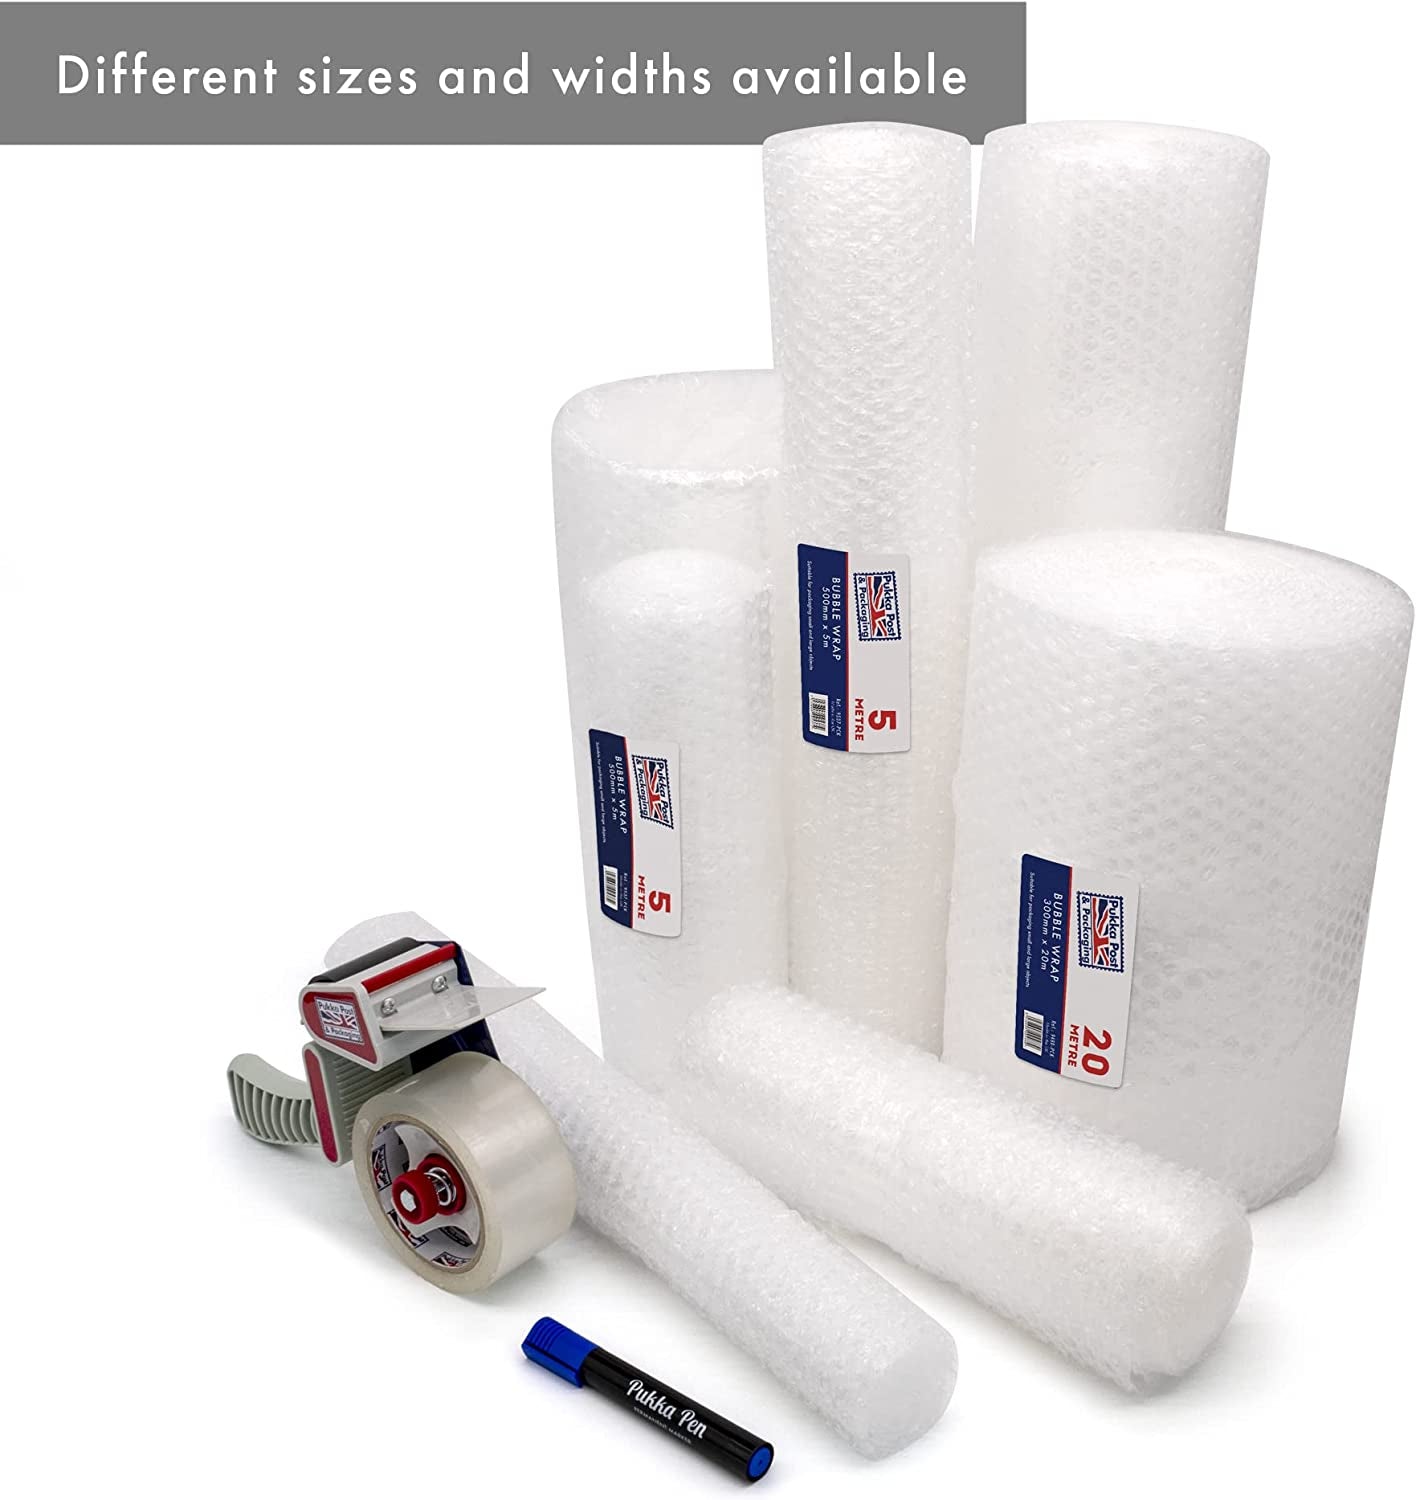 , Pukka Post – Lightweight Protective Bubble Cushioning Wrap for Packaging and Mailing, Small Air Bubbles, 300Mm X 20M Roll, Clear for Packing or Storage Boxes